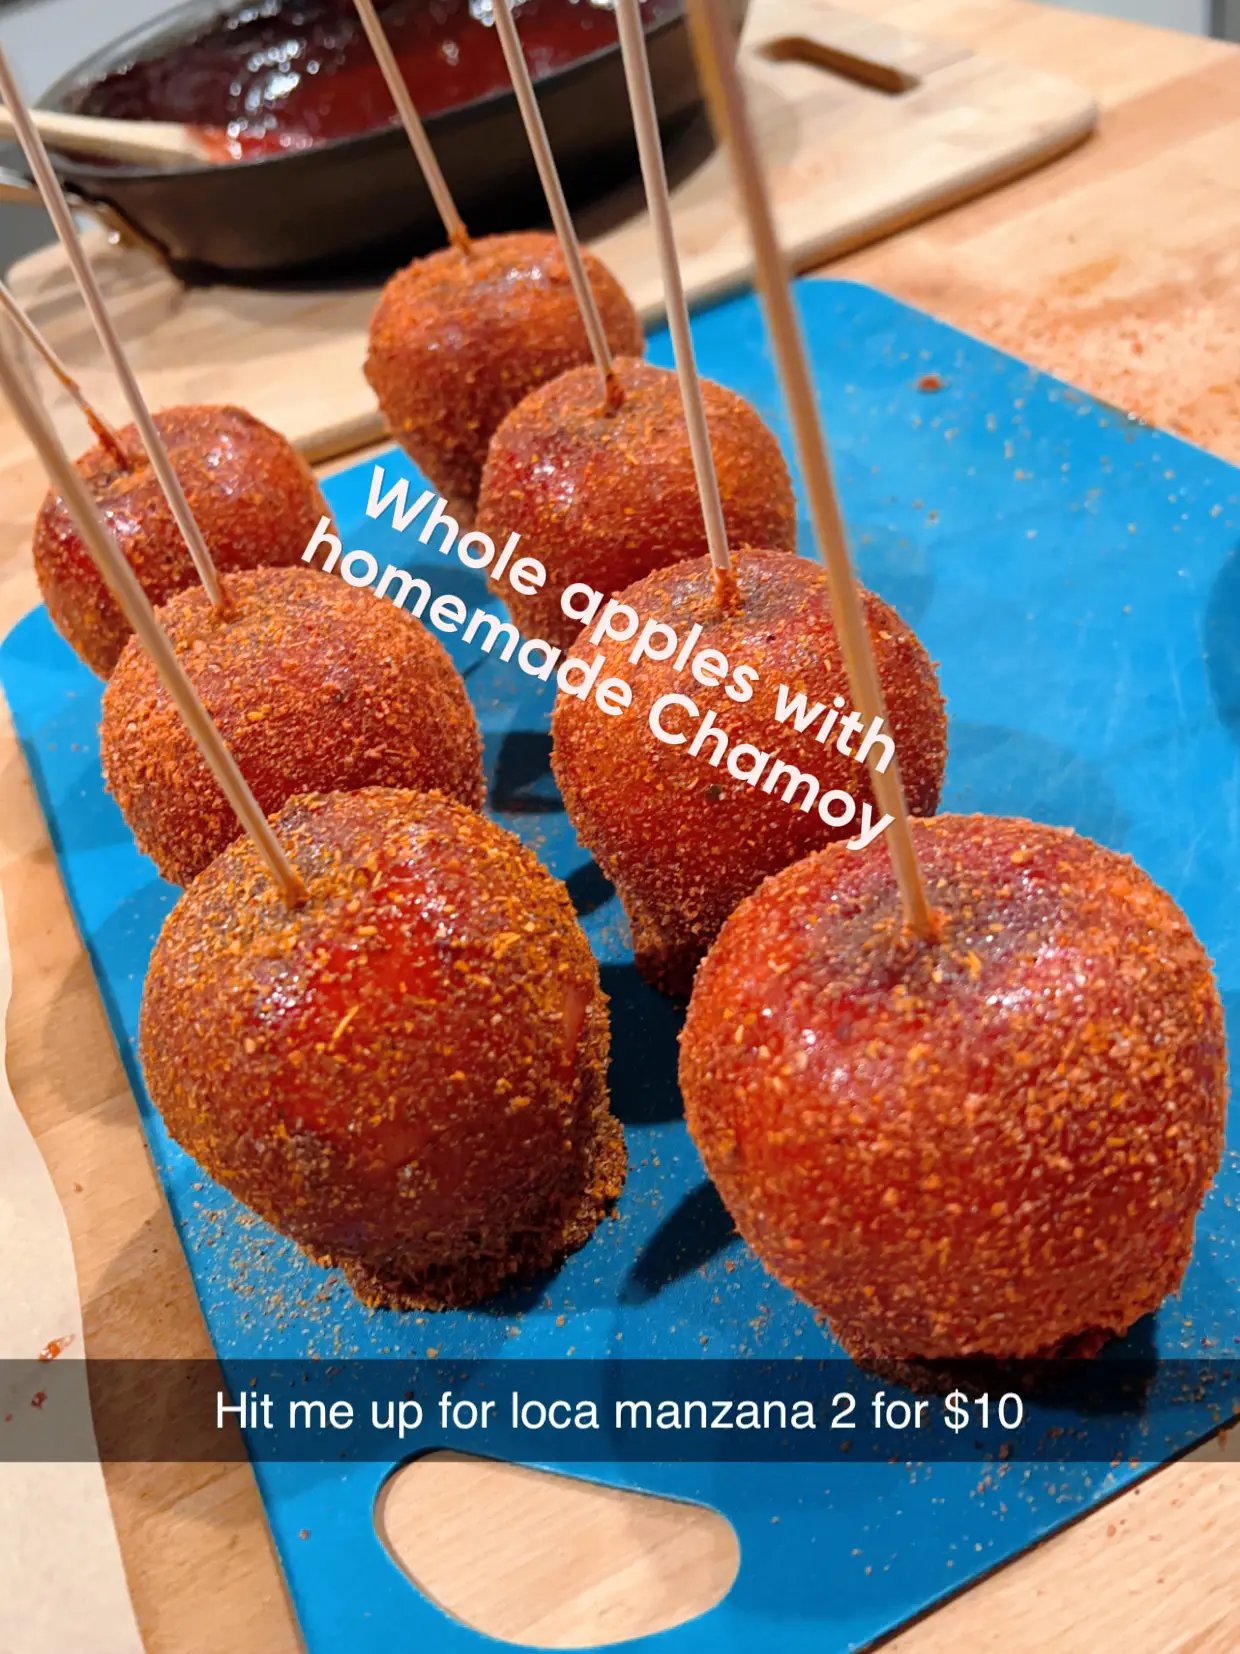 Whole Apples With Homemade Chamoy